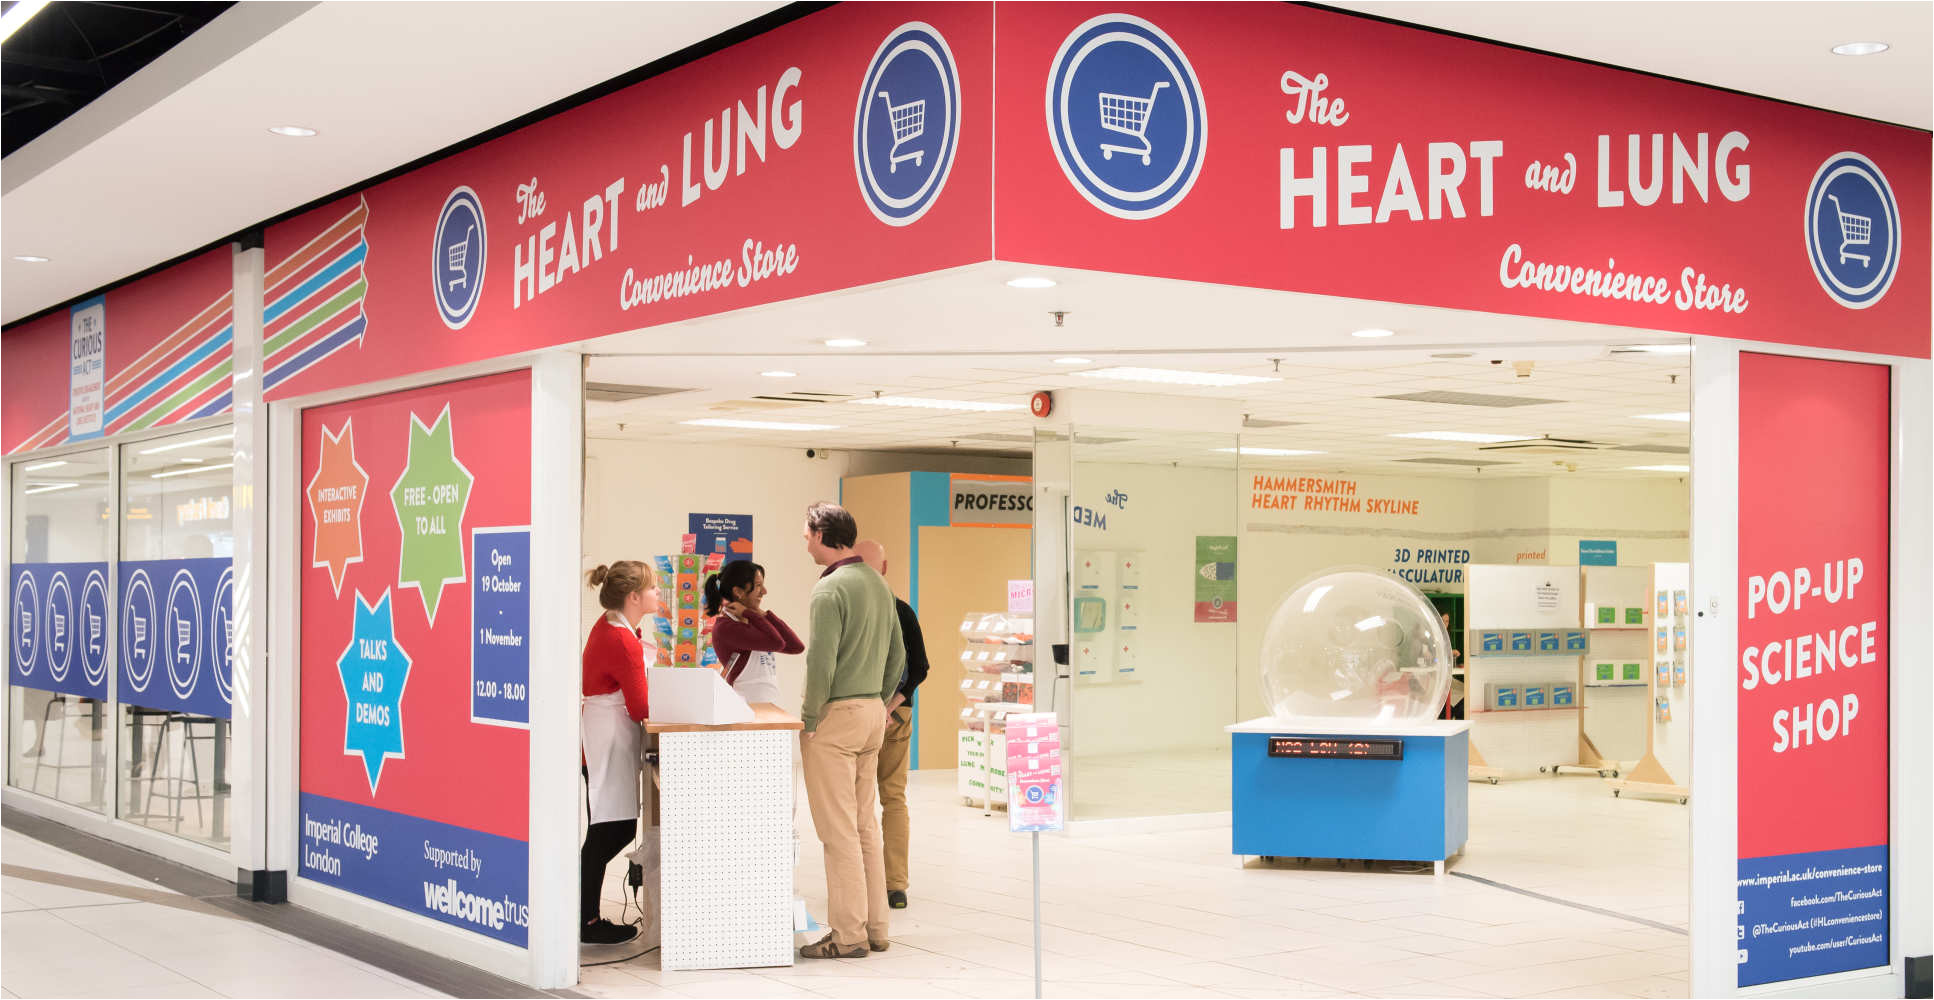 the store was a collection of interactive exhibits and installations exploring the future of heart and lung healthcare and how medicine is becoming more